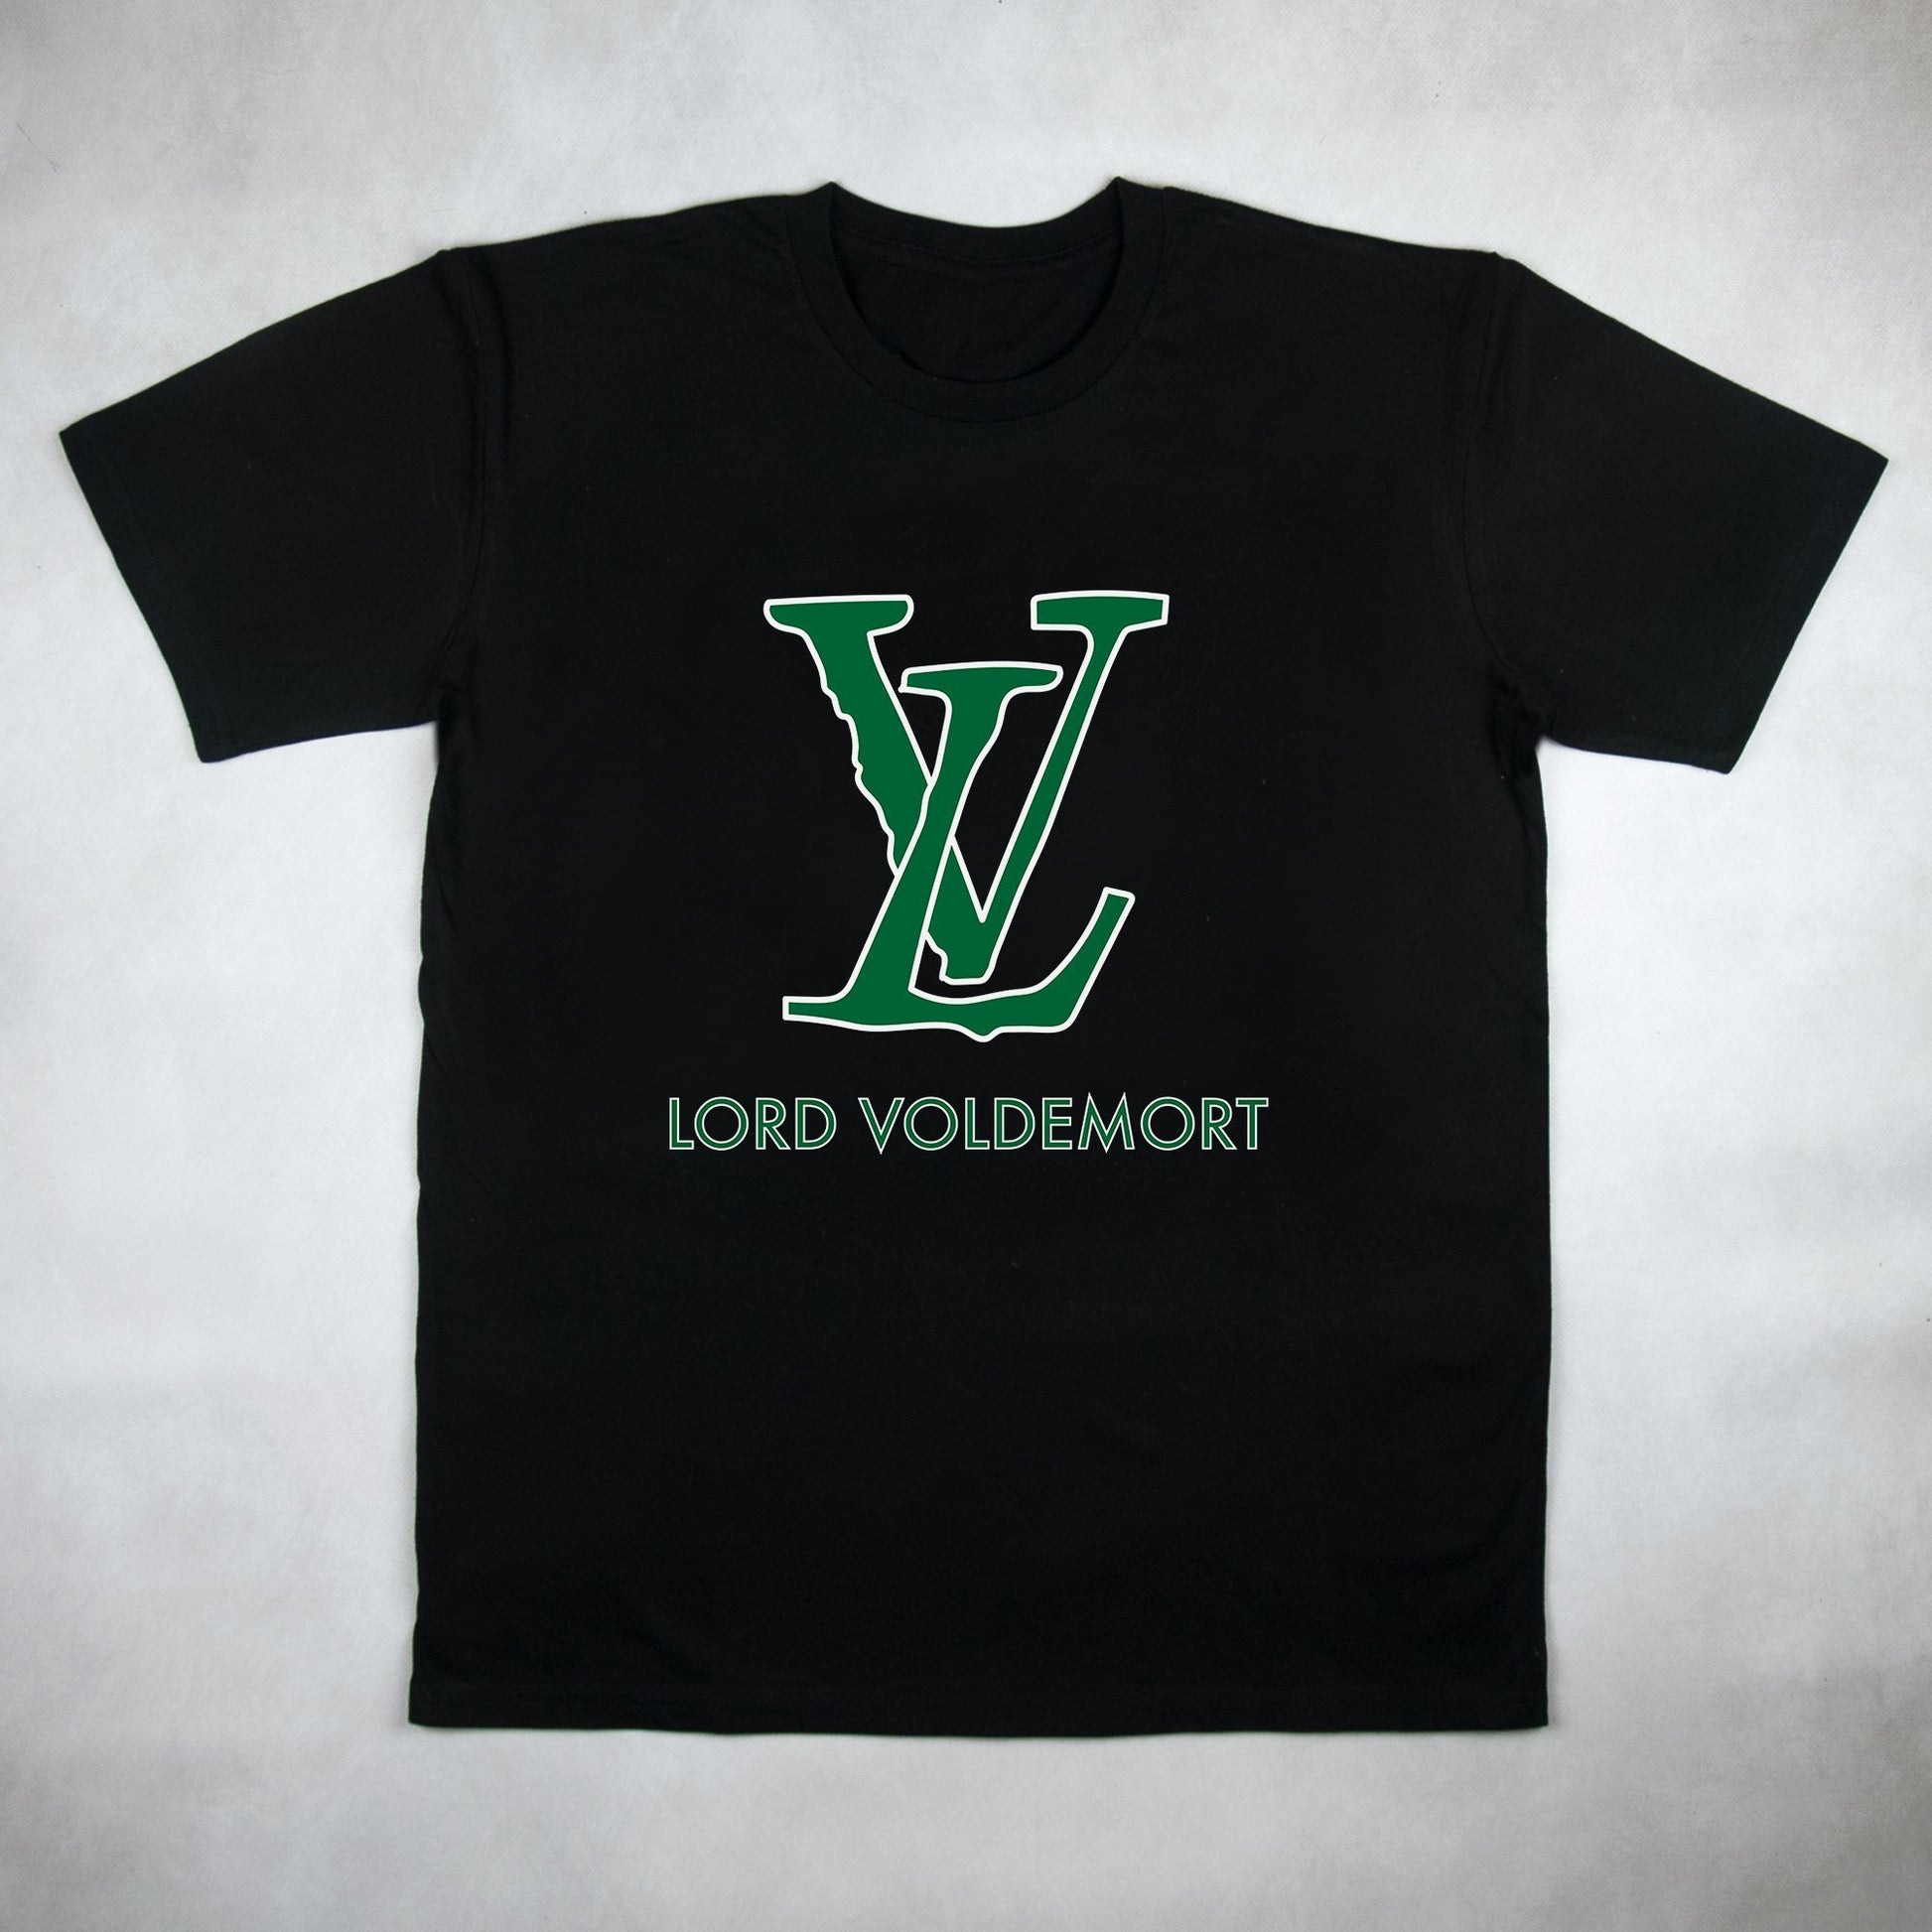 Classy Duds Short Sleeve T-Shirts Lord Voldemort Tee